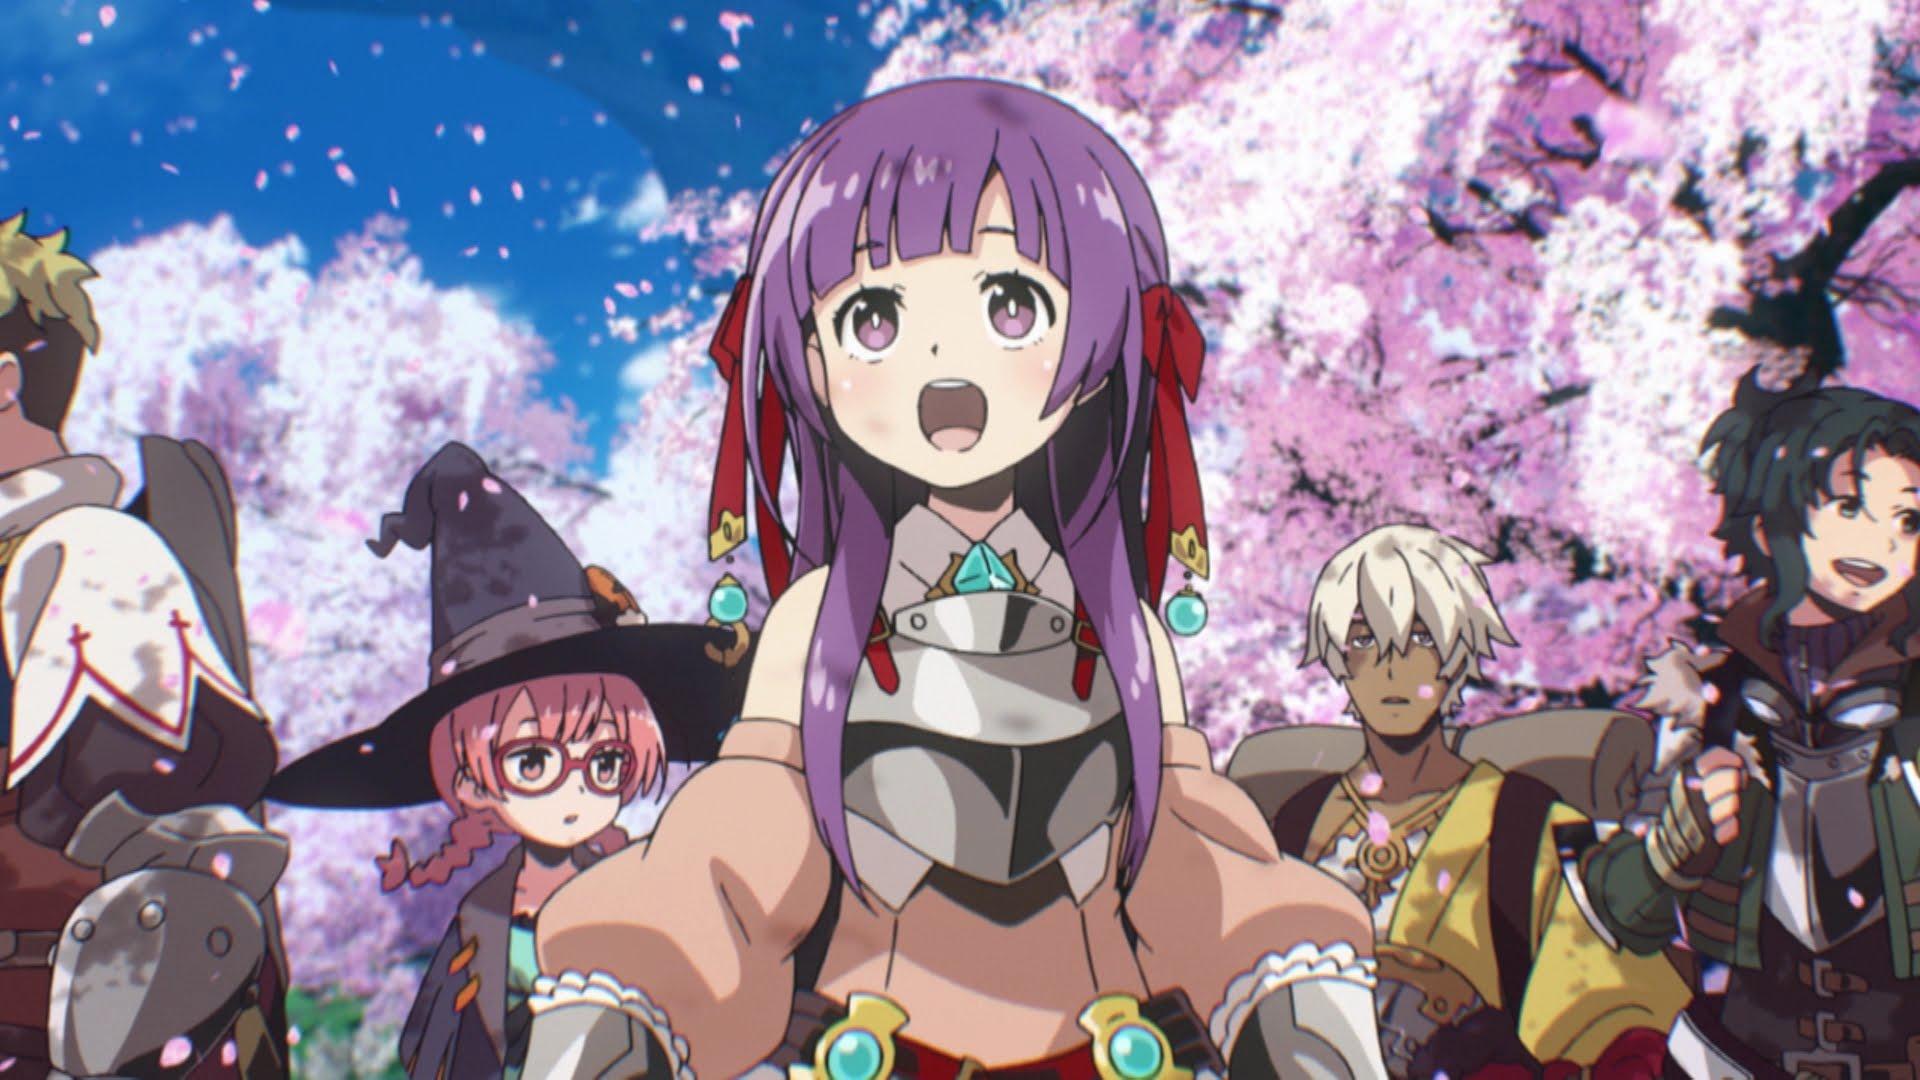 Etrian Odyssey 2 Untold dated for North American release